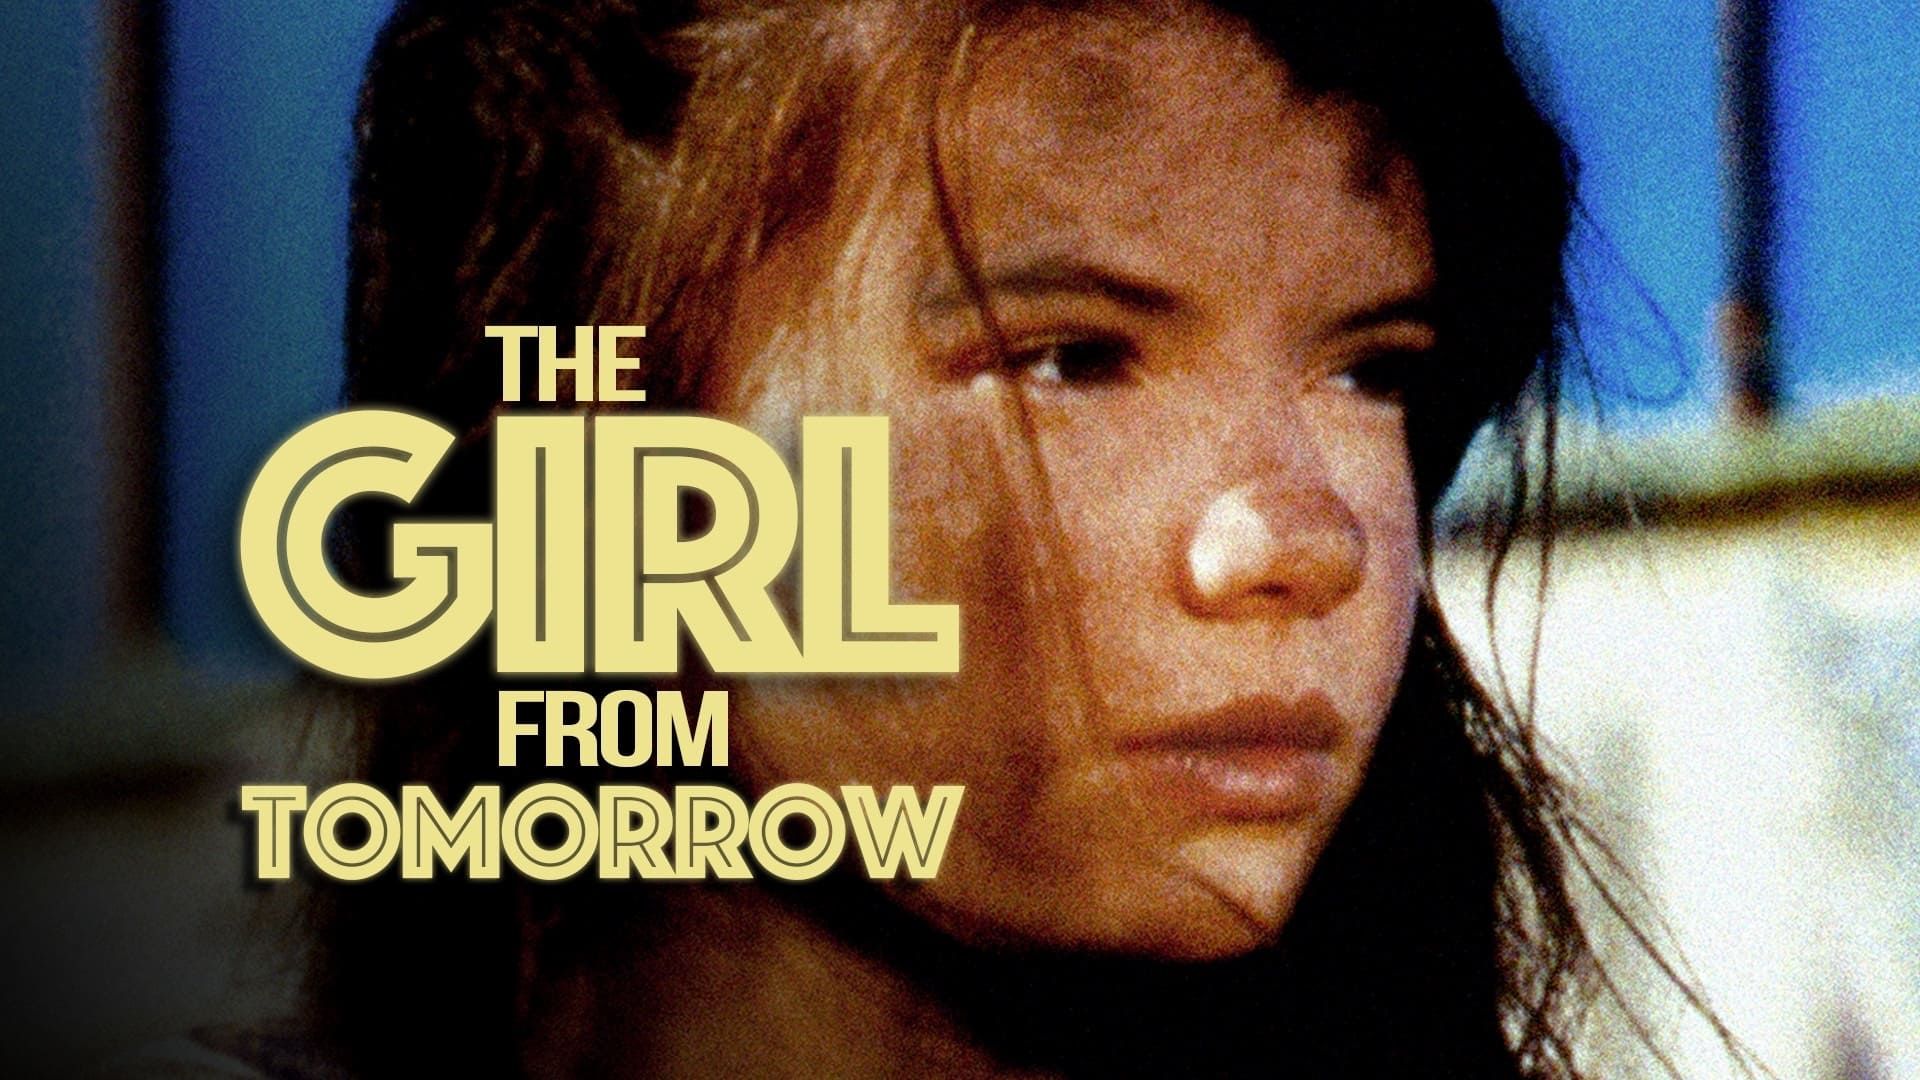 The Girl from Tomorrow background